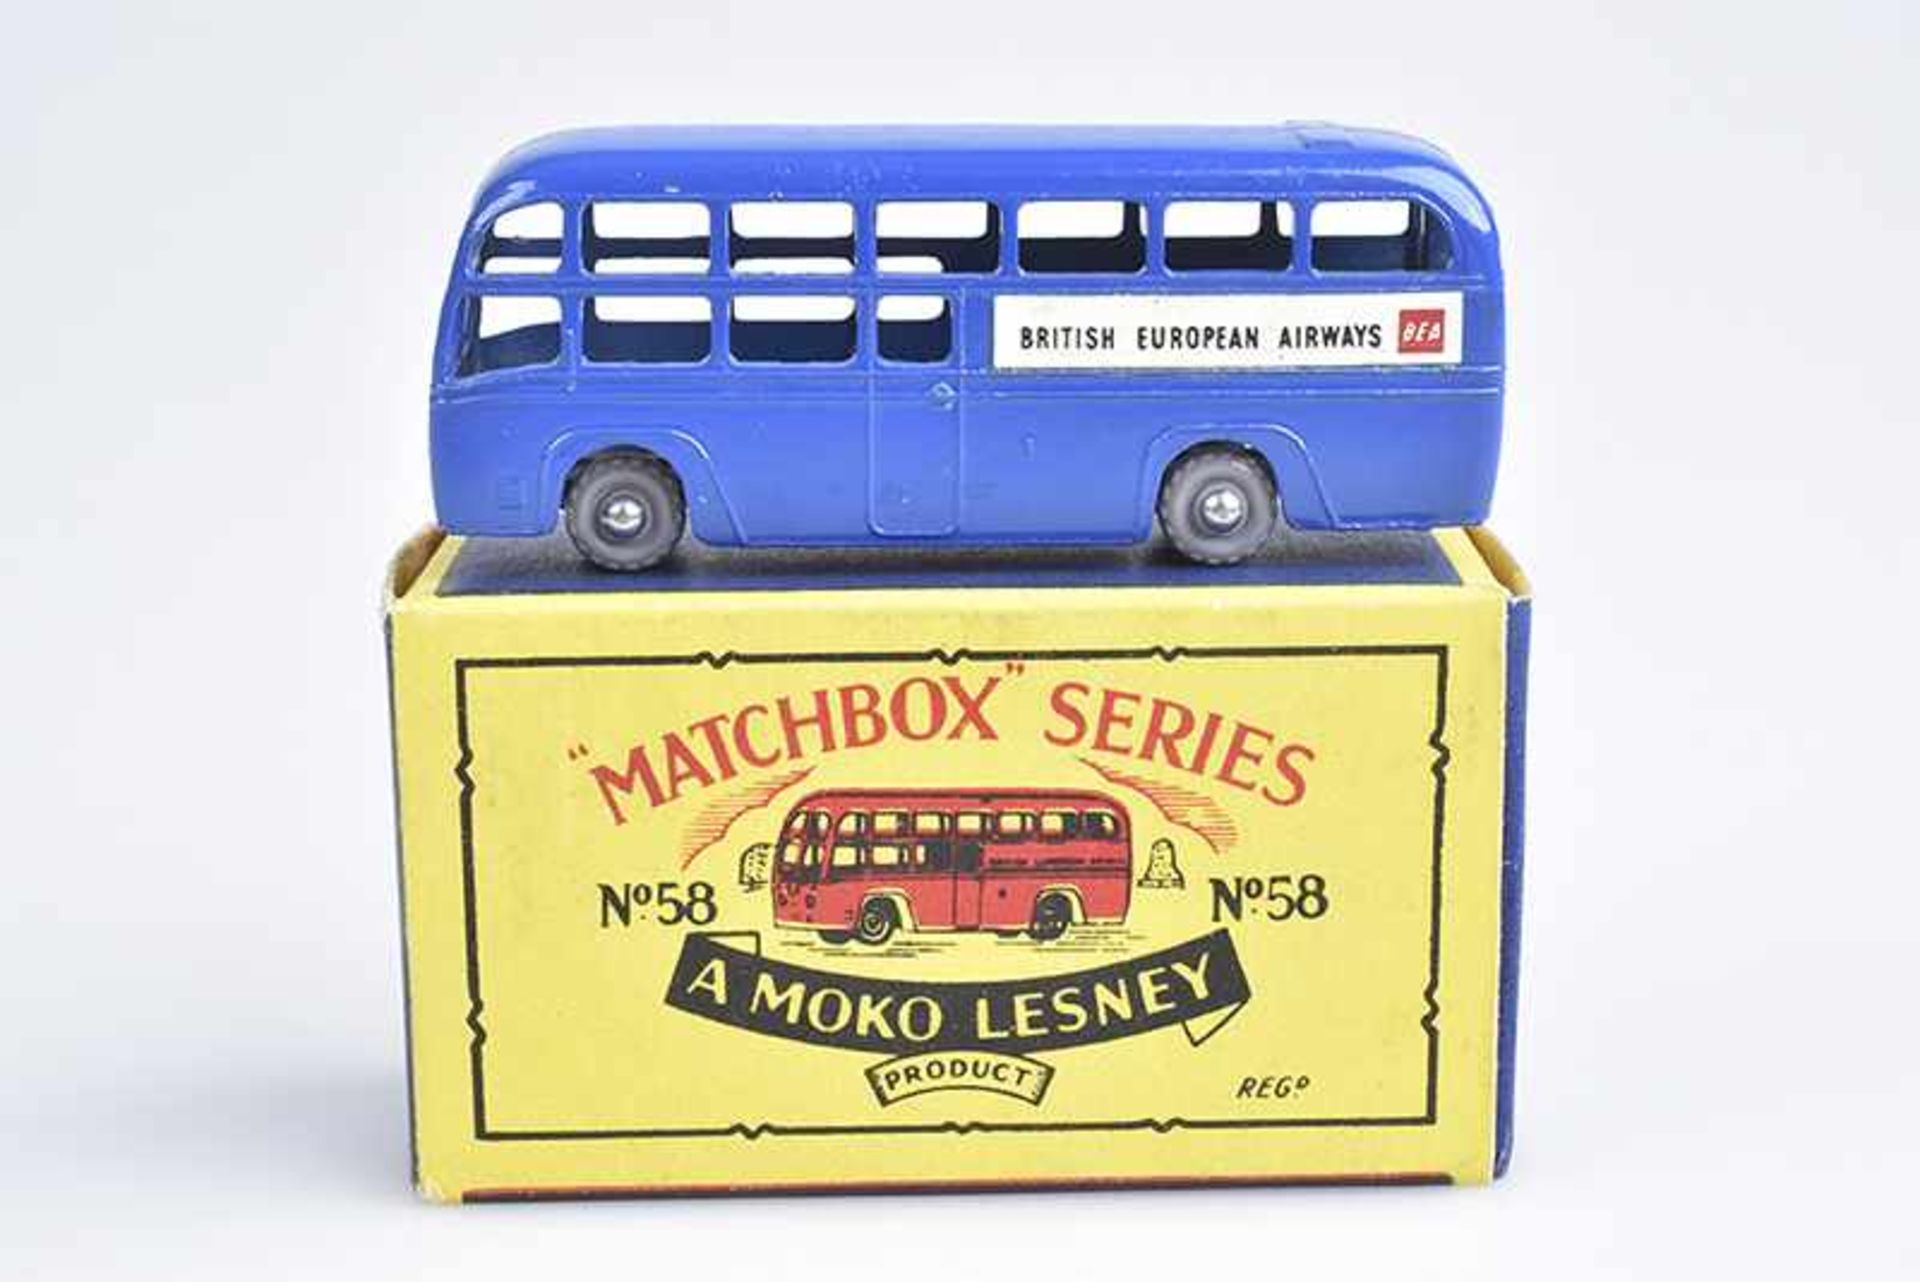 MATCHBOX BEA Coach No. 58, 50/60er Jahre, Made in England, A Moko Lesney Product, Metall, L 6,5